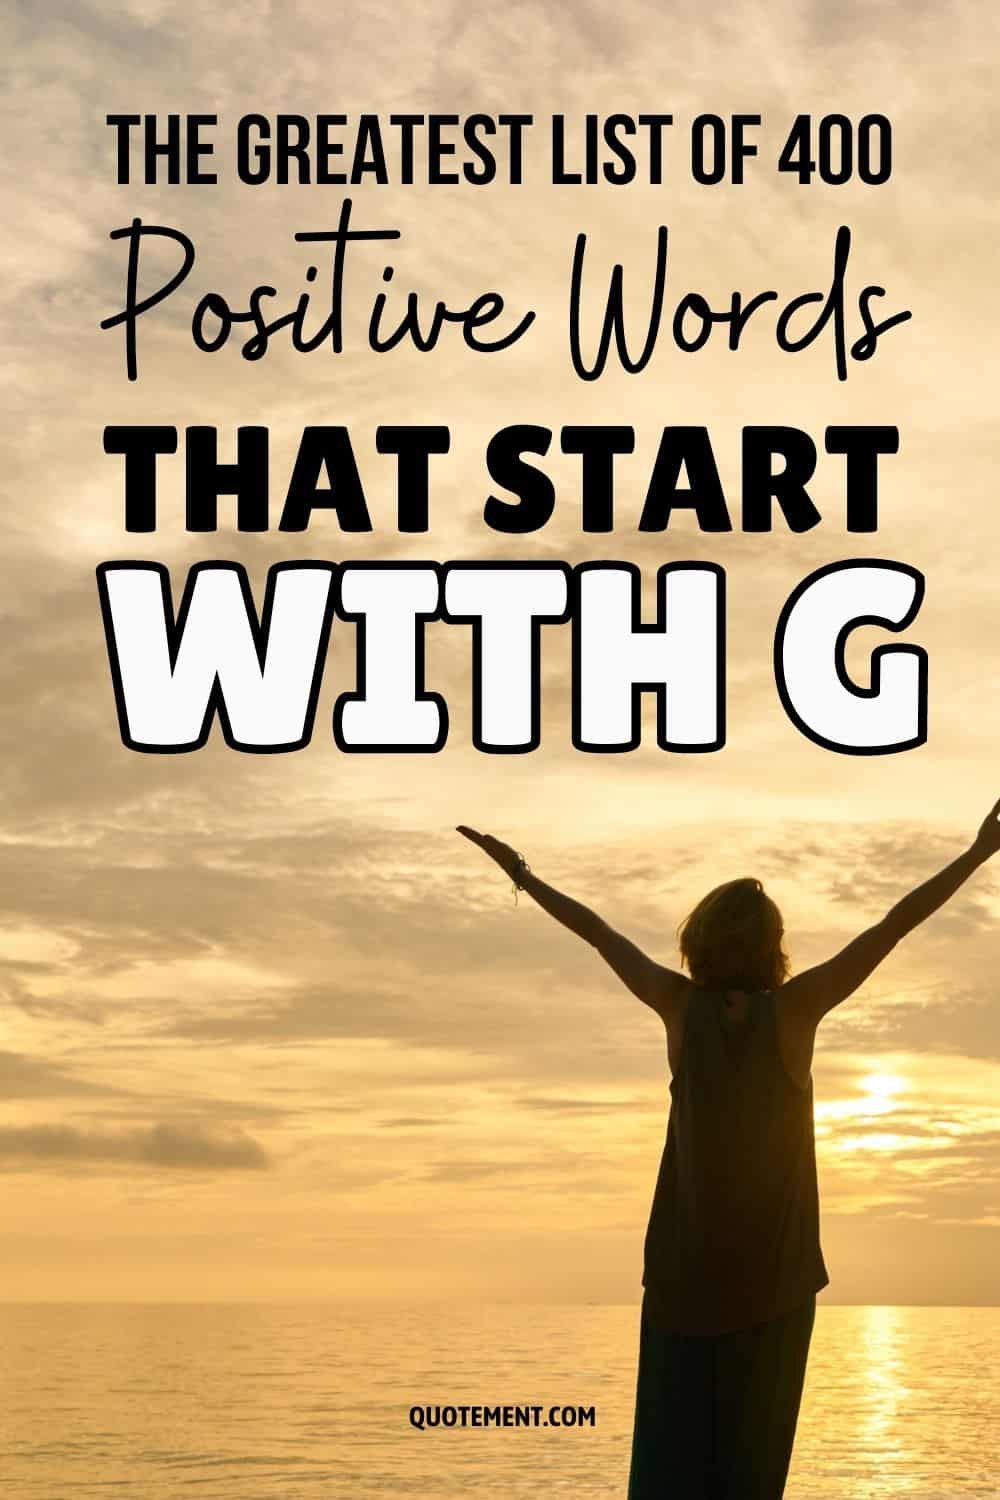 The Greatest List Of 400 Positive Words That Start With G